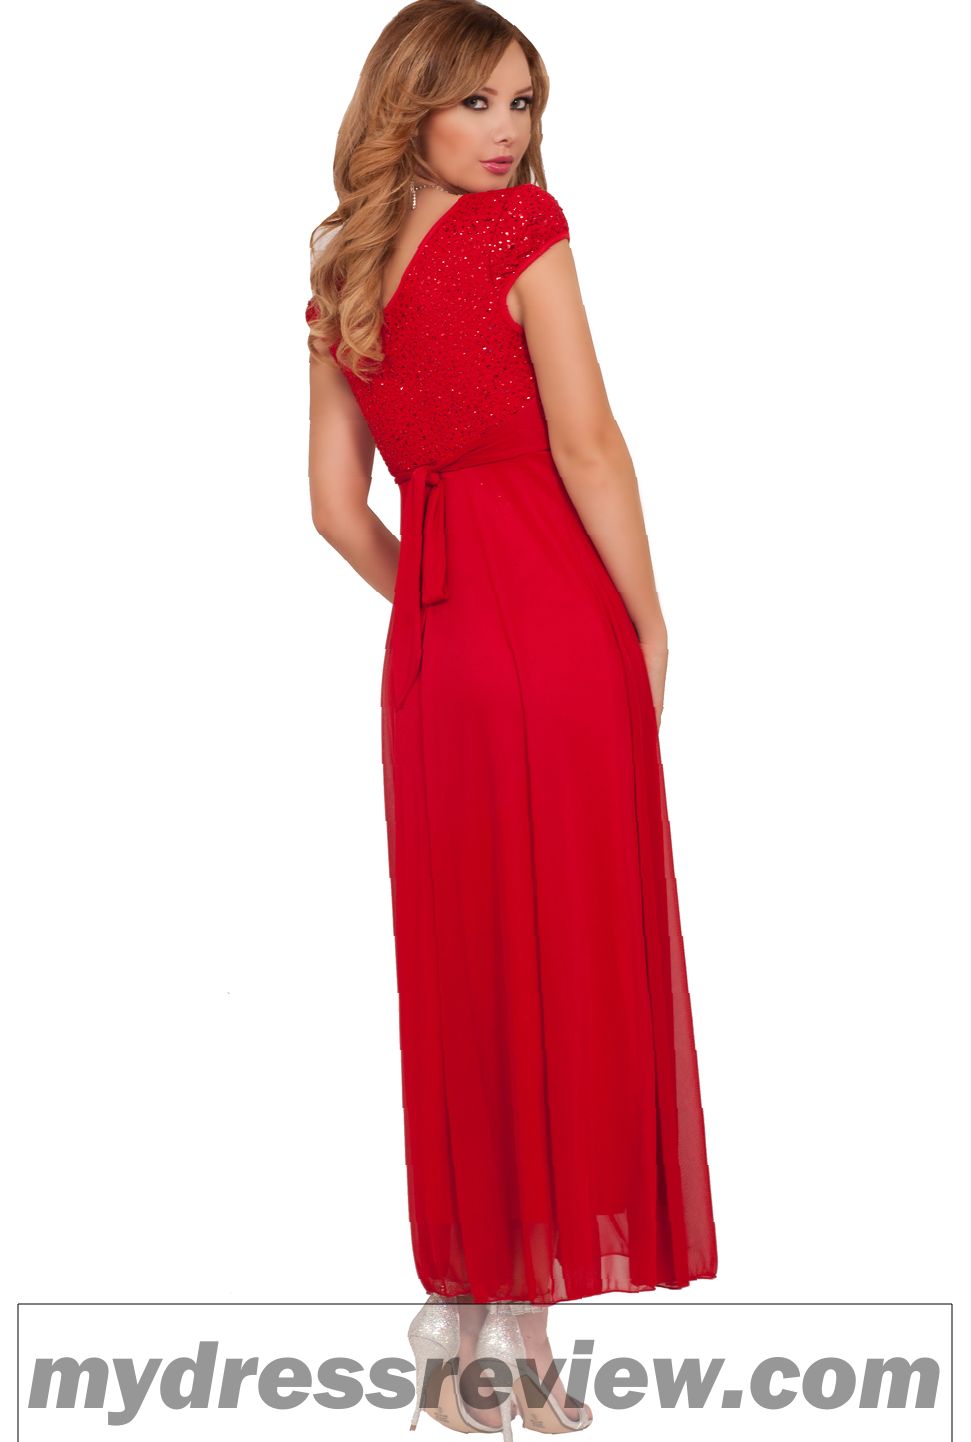 Full Long Gown & Clothing Brand Reviews